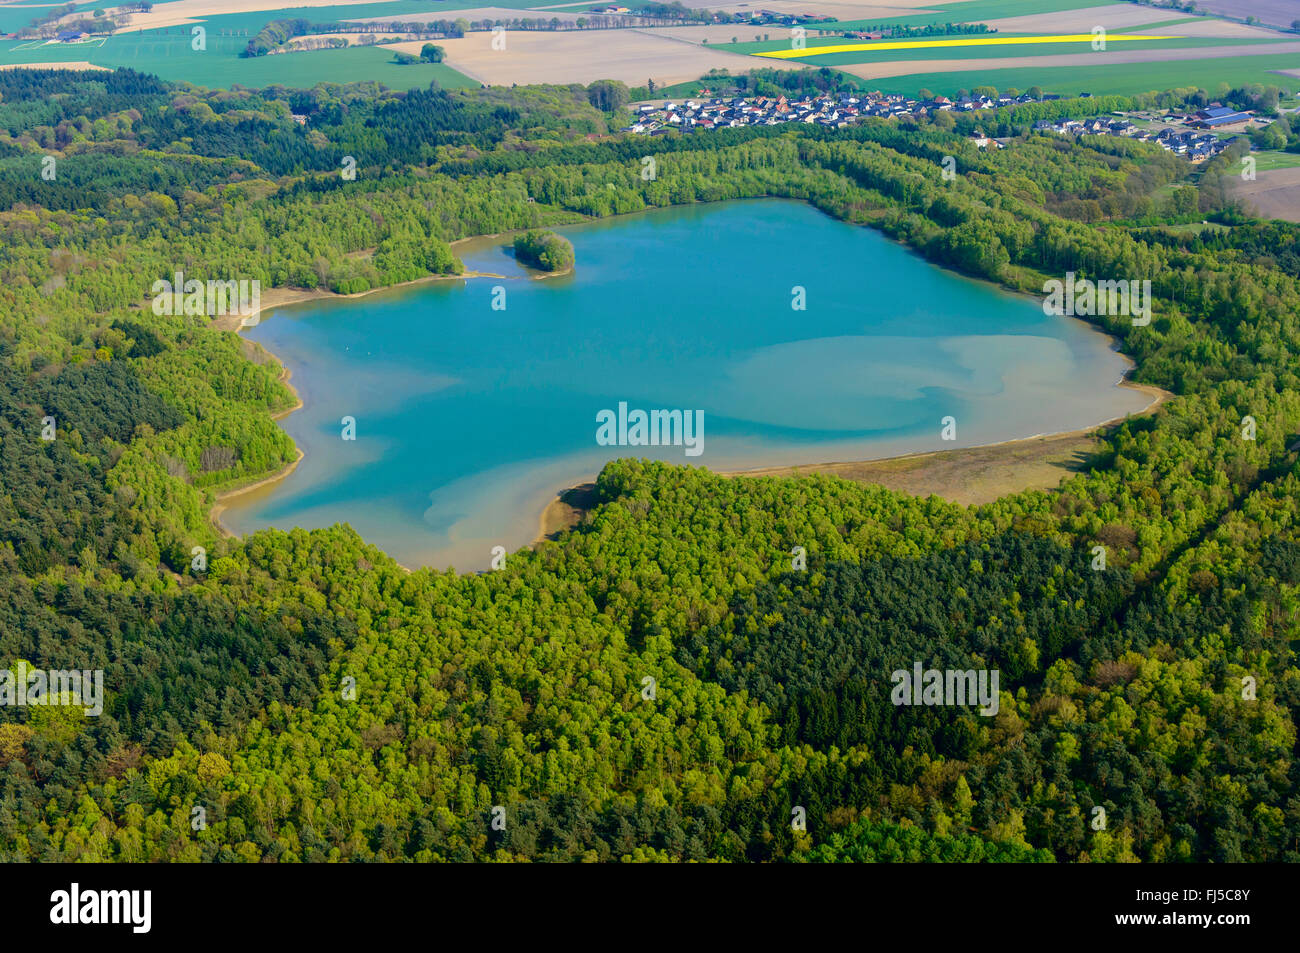 Dammer mountain lake, county Vechta, aerial view, Germany, Lower Saxony, Oldenburger Muensterland, Damme Stock Photo